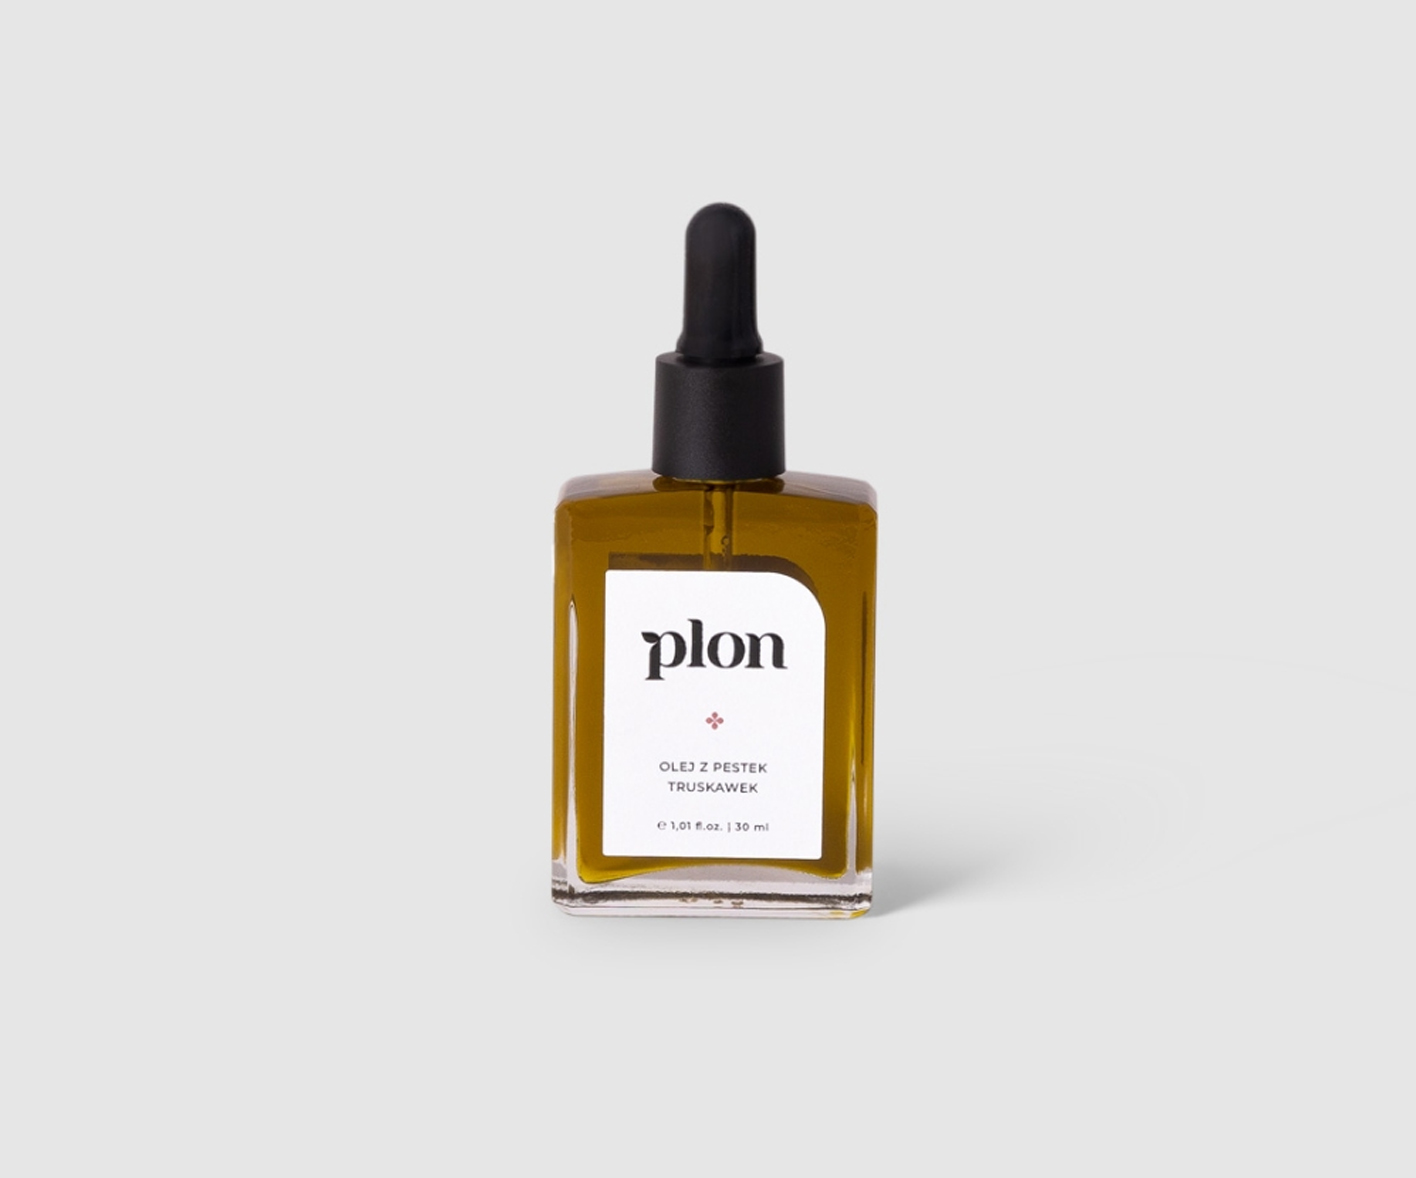 Plon, strawberry seed oil for the face